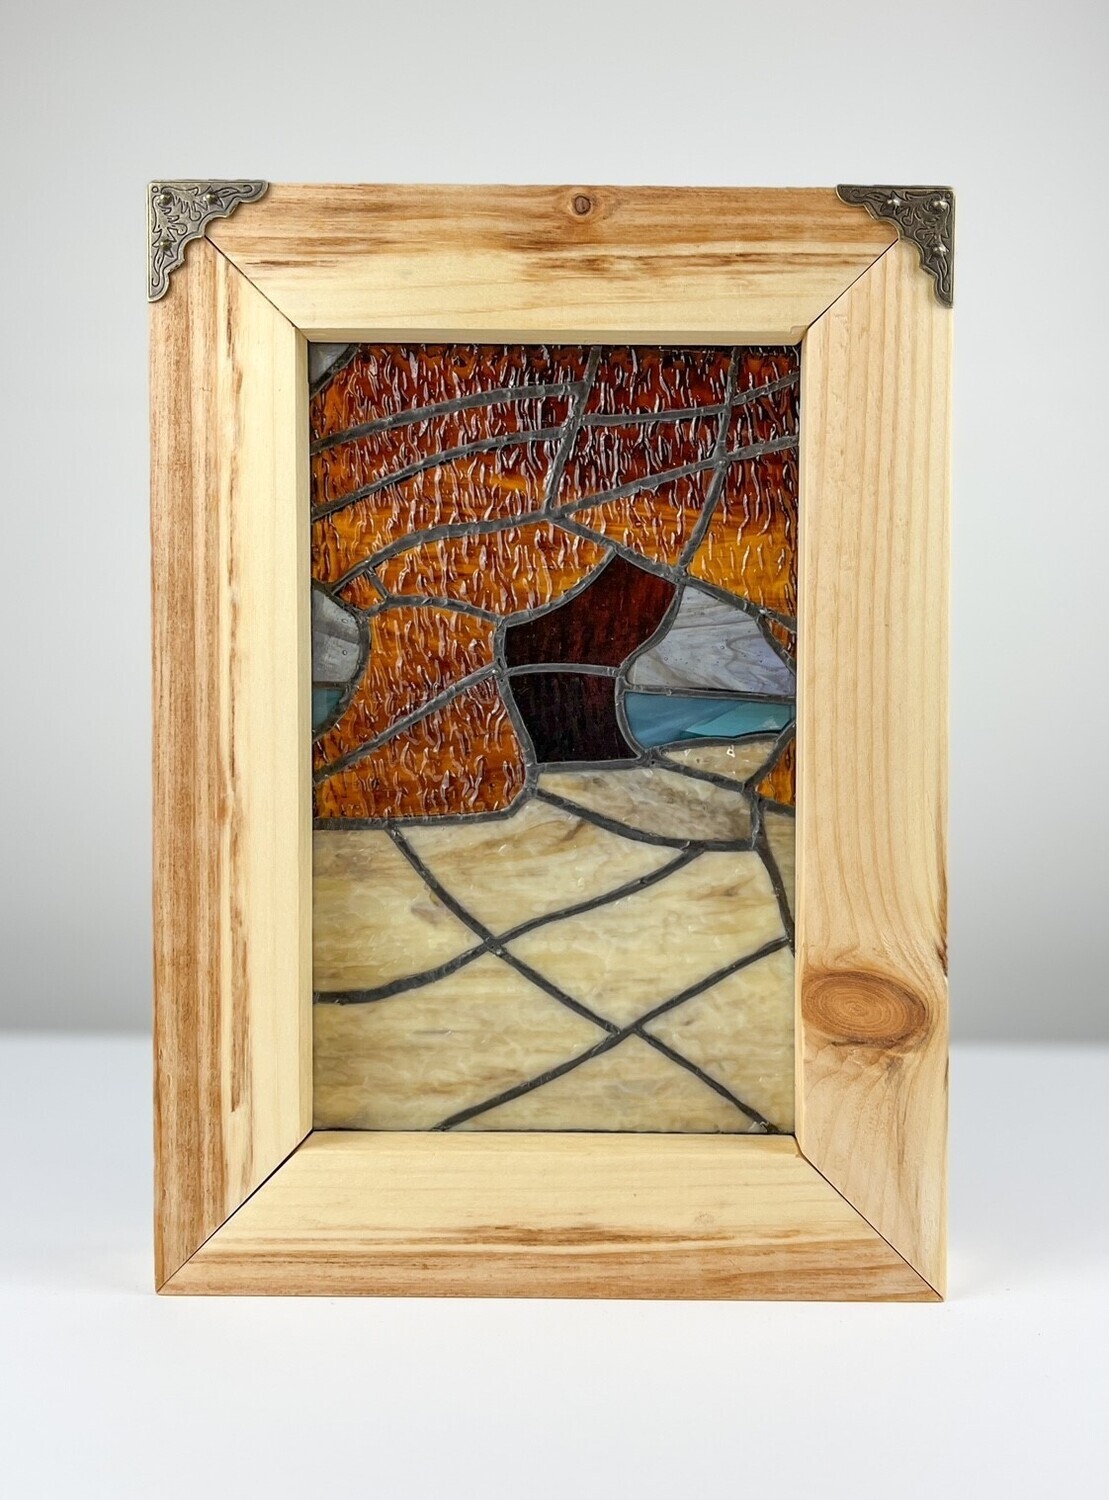 "Hopewell Rocks 1" 8x12" Framed Stained Glass